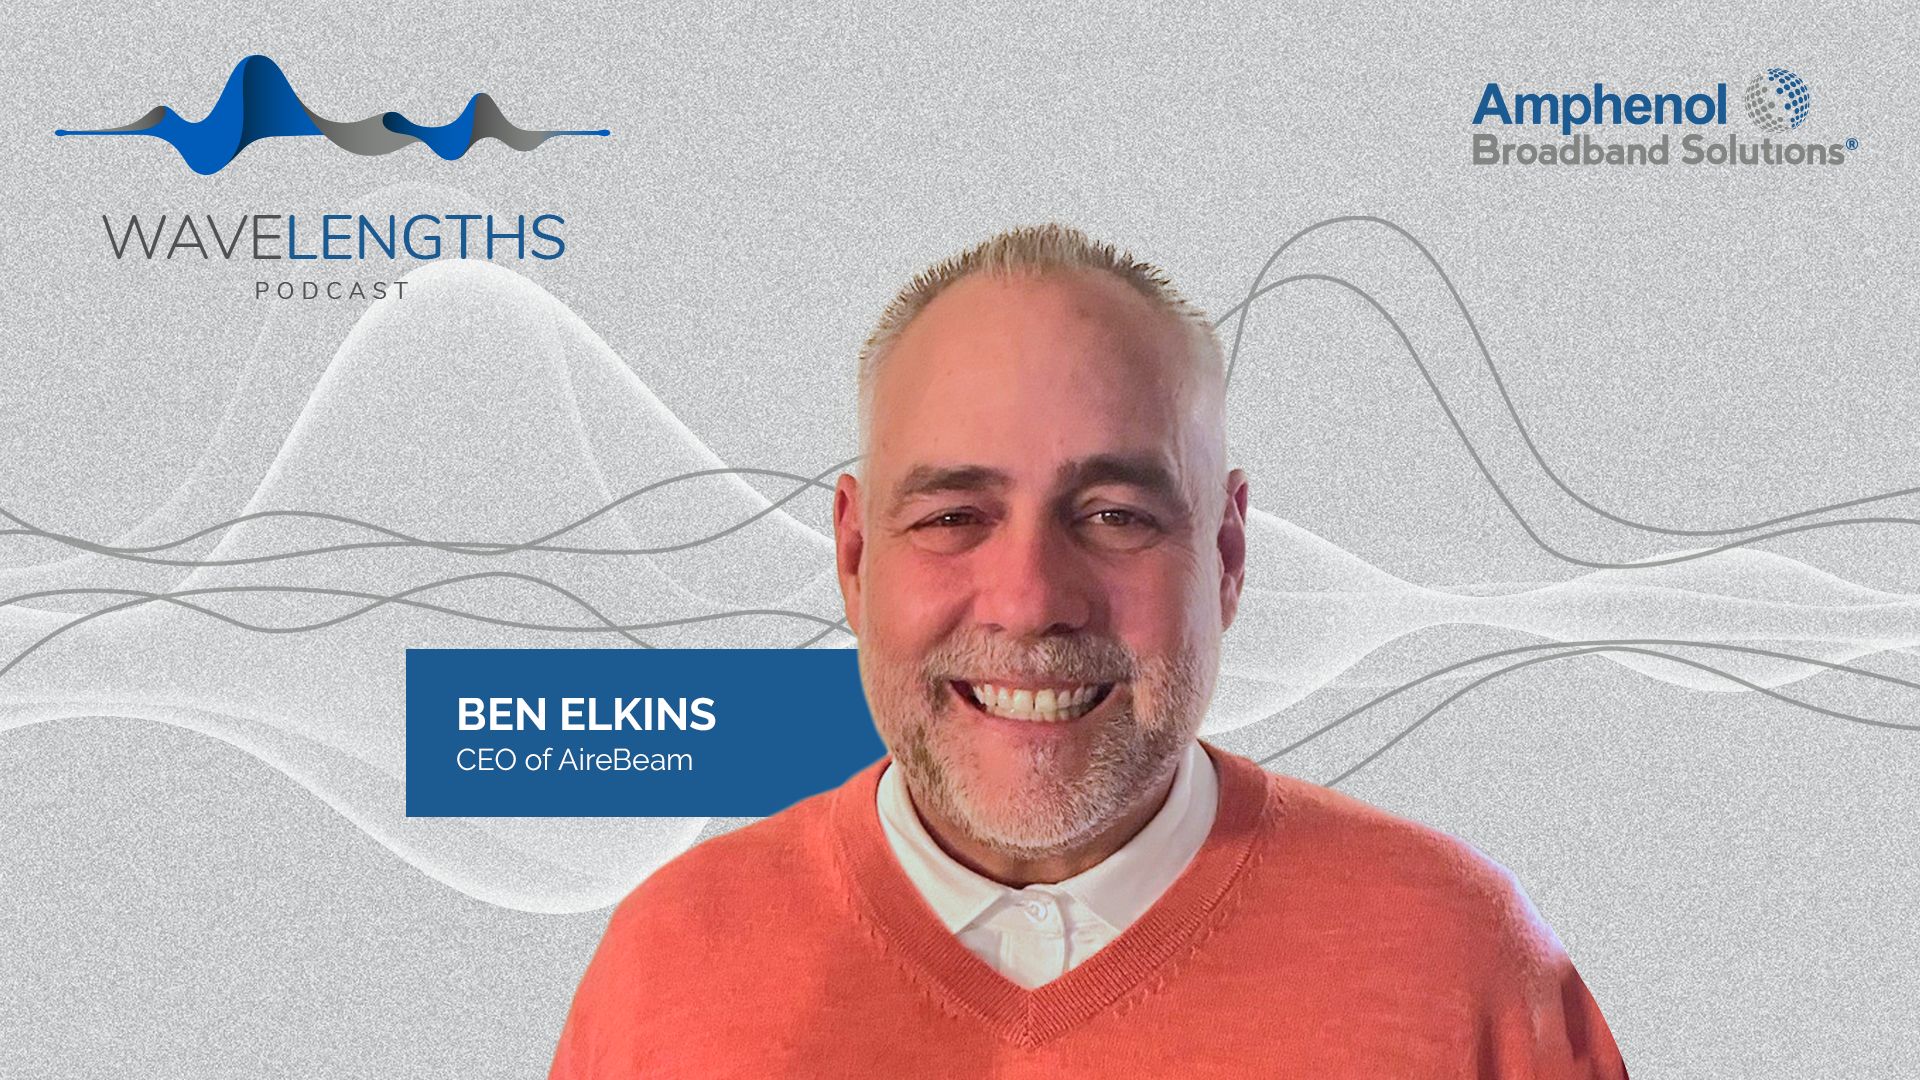 Wavelengths Podcast - Ben Elkins CEO of AireBeam